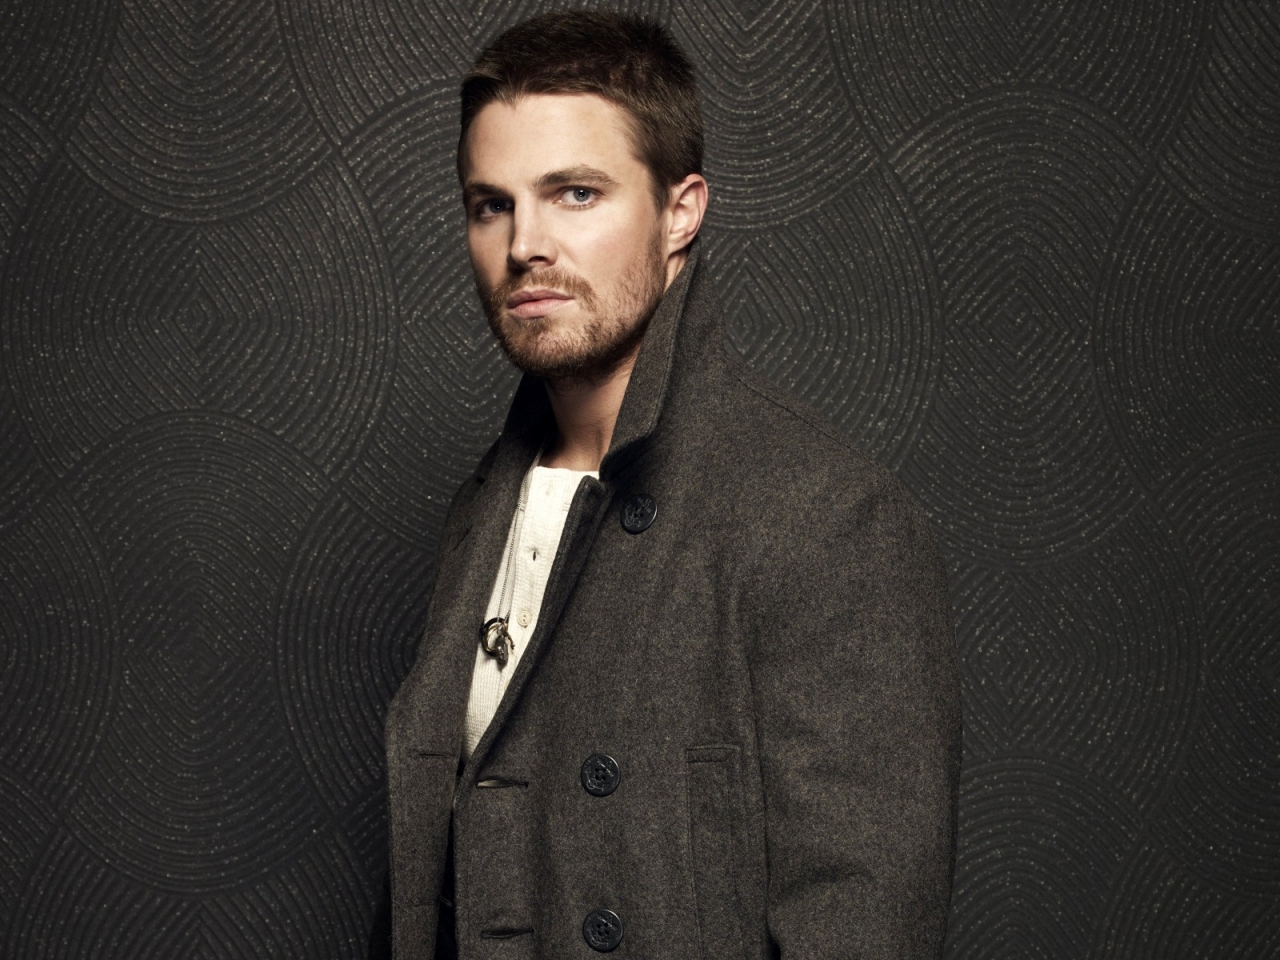 Stephen Amell for 1280 x 960 resolution